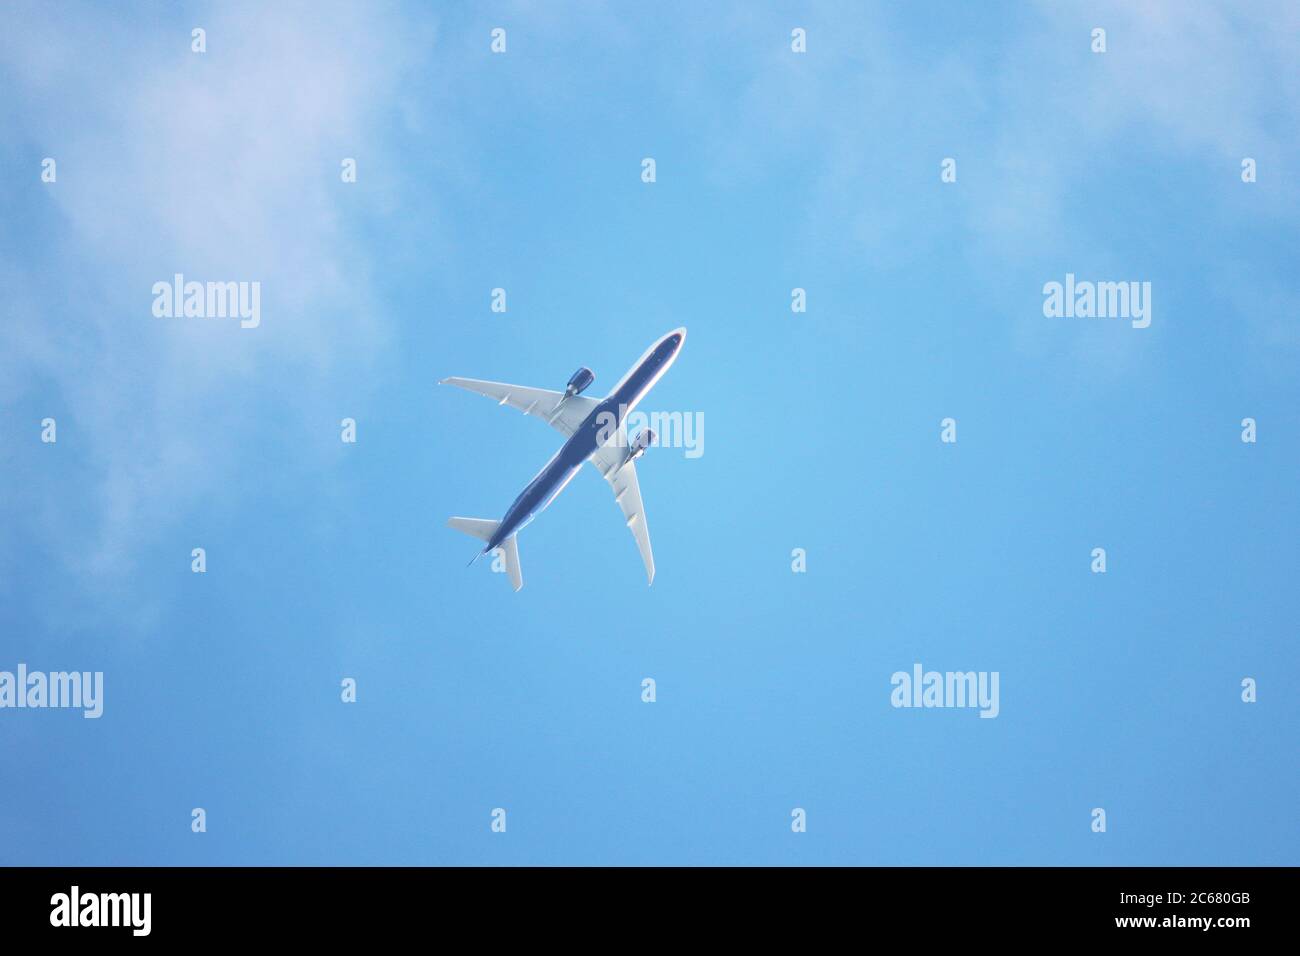 Airplane flying in the blue sky with white clouds, bottom view. Two-engine commercial plane after taking off Stock Photo